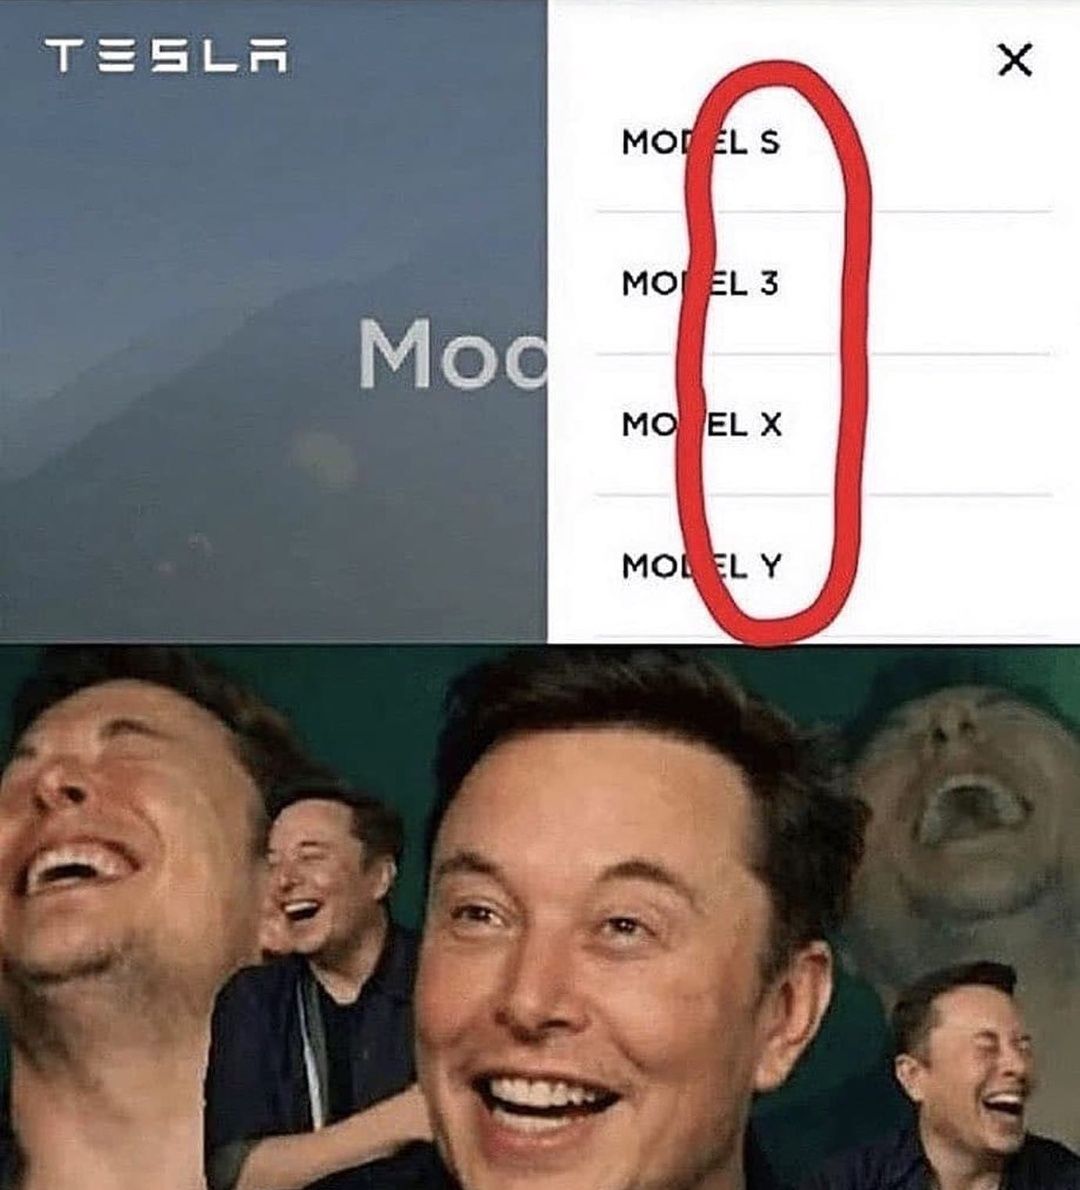 My guy Elon just did what's called a pro gamers move